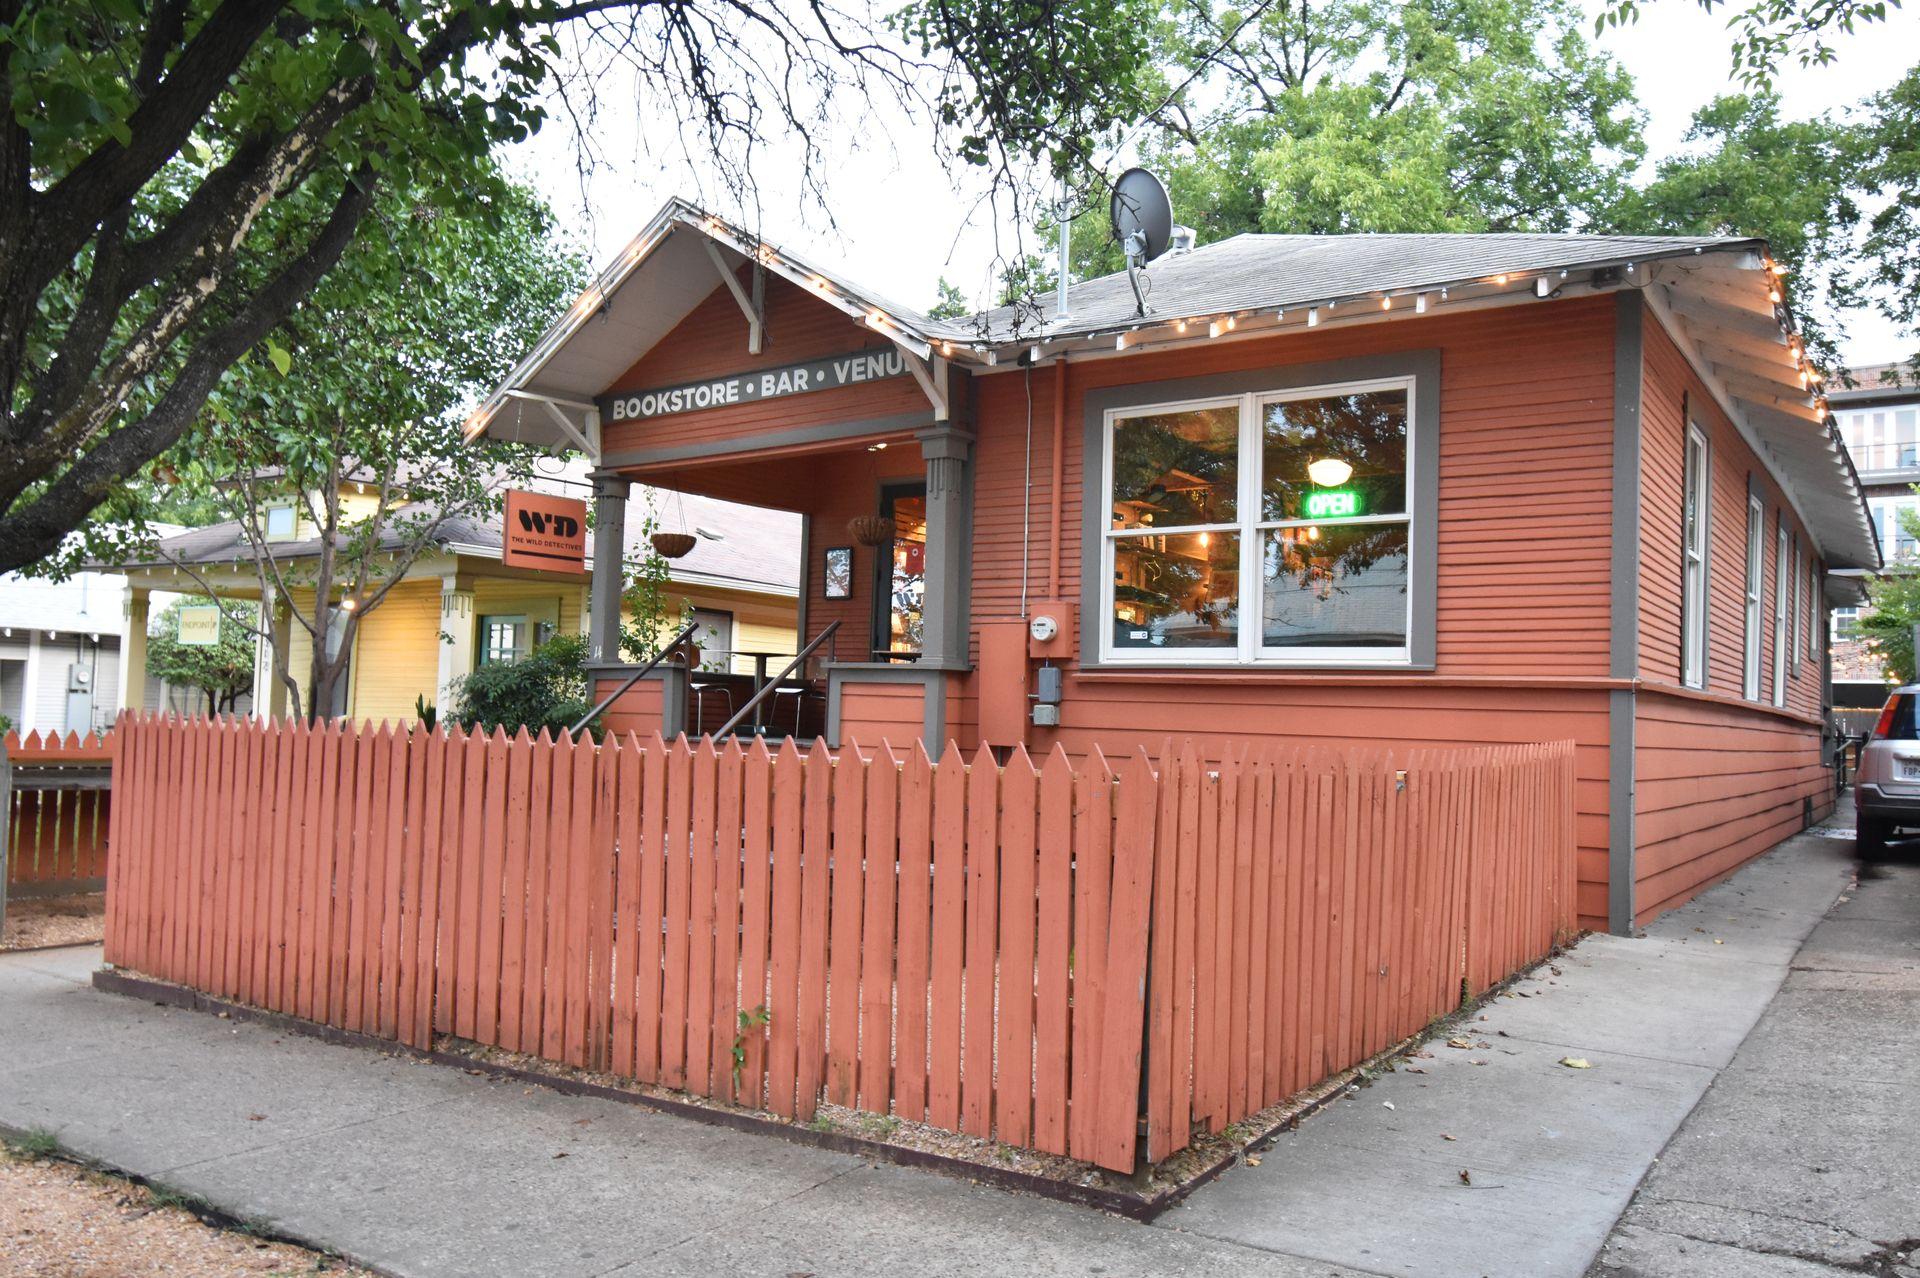 The exterior of Wild Detectives. The building is orange with a fence around the front patio space.